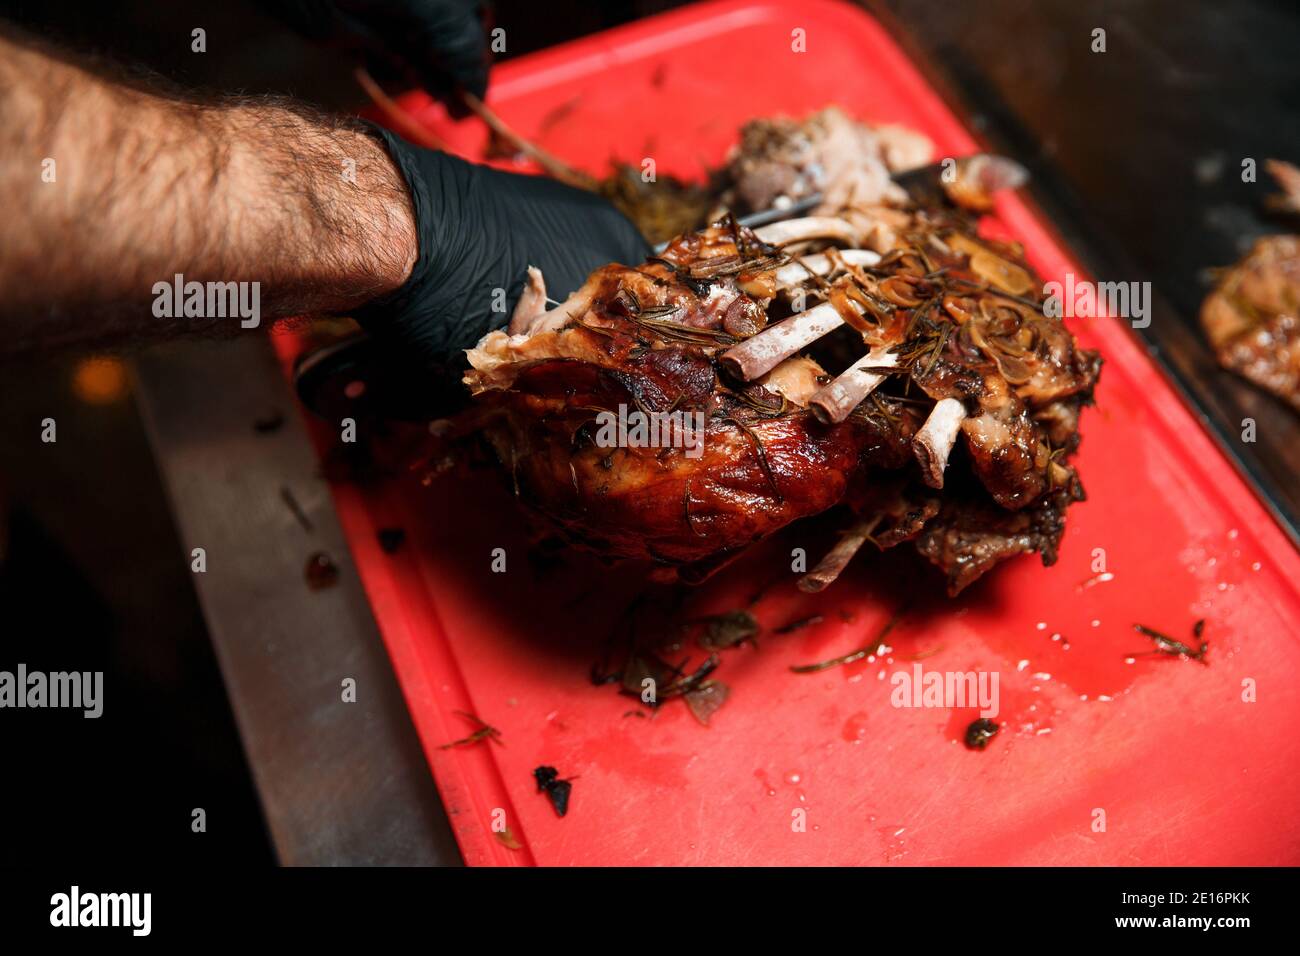 Chev cuts juicy cooked meat, separating the meat from the bone with a knife. Stock Photo